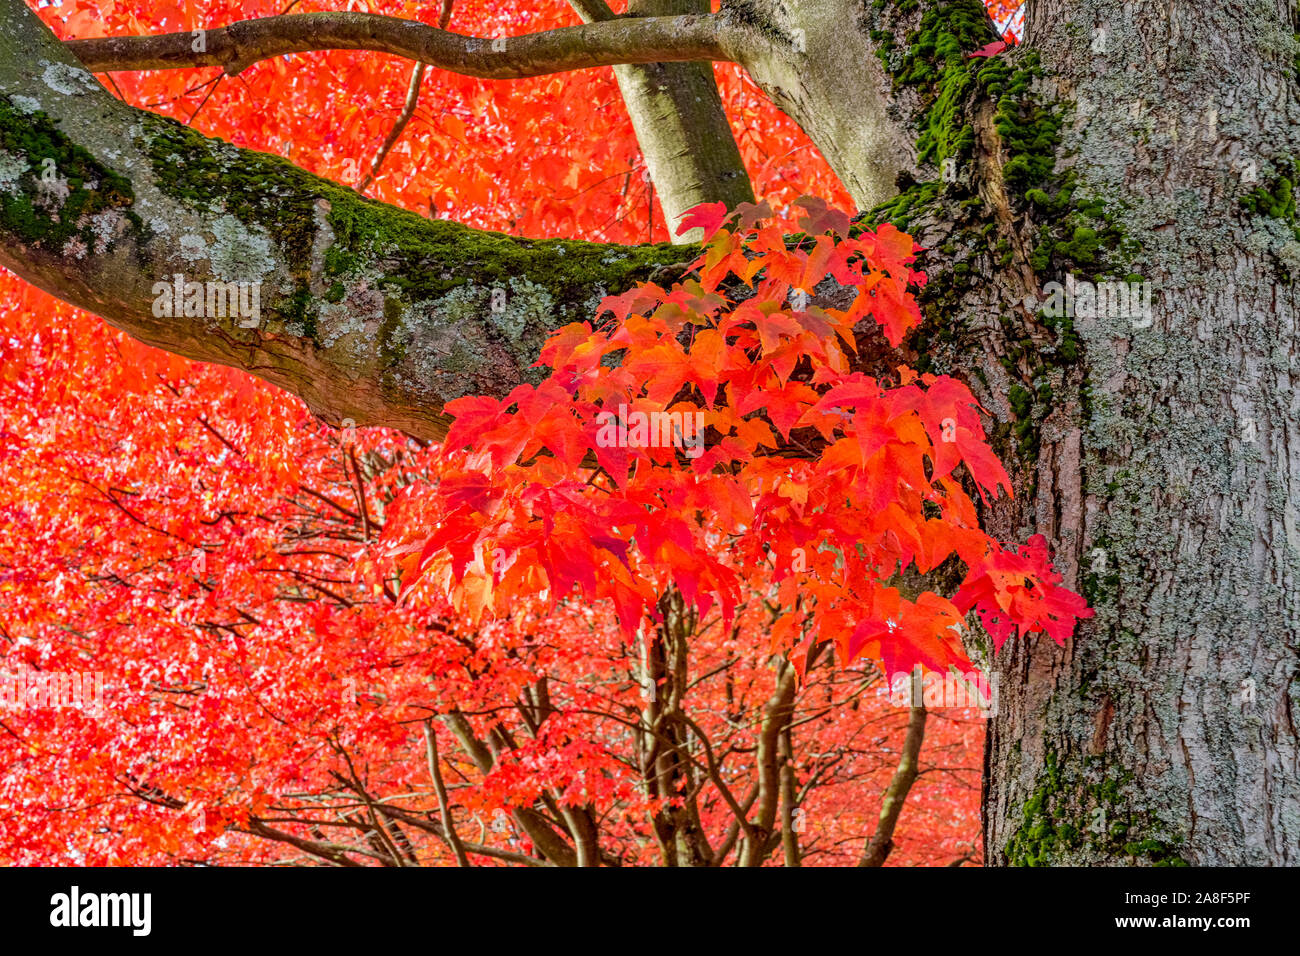 Fall colour, tree with red maple like leaves Stock Photo